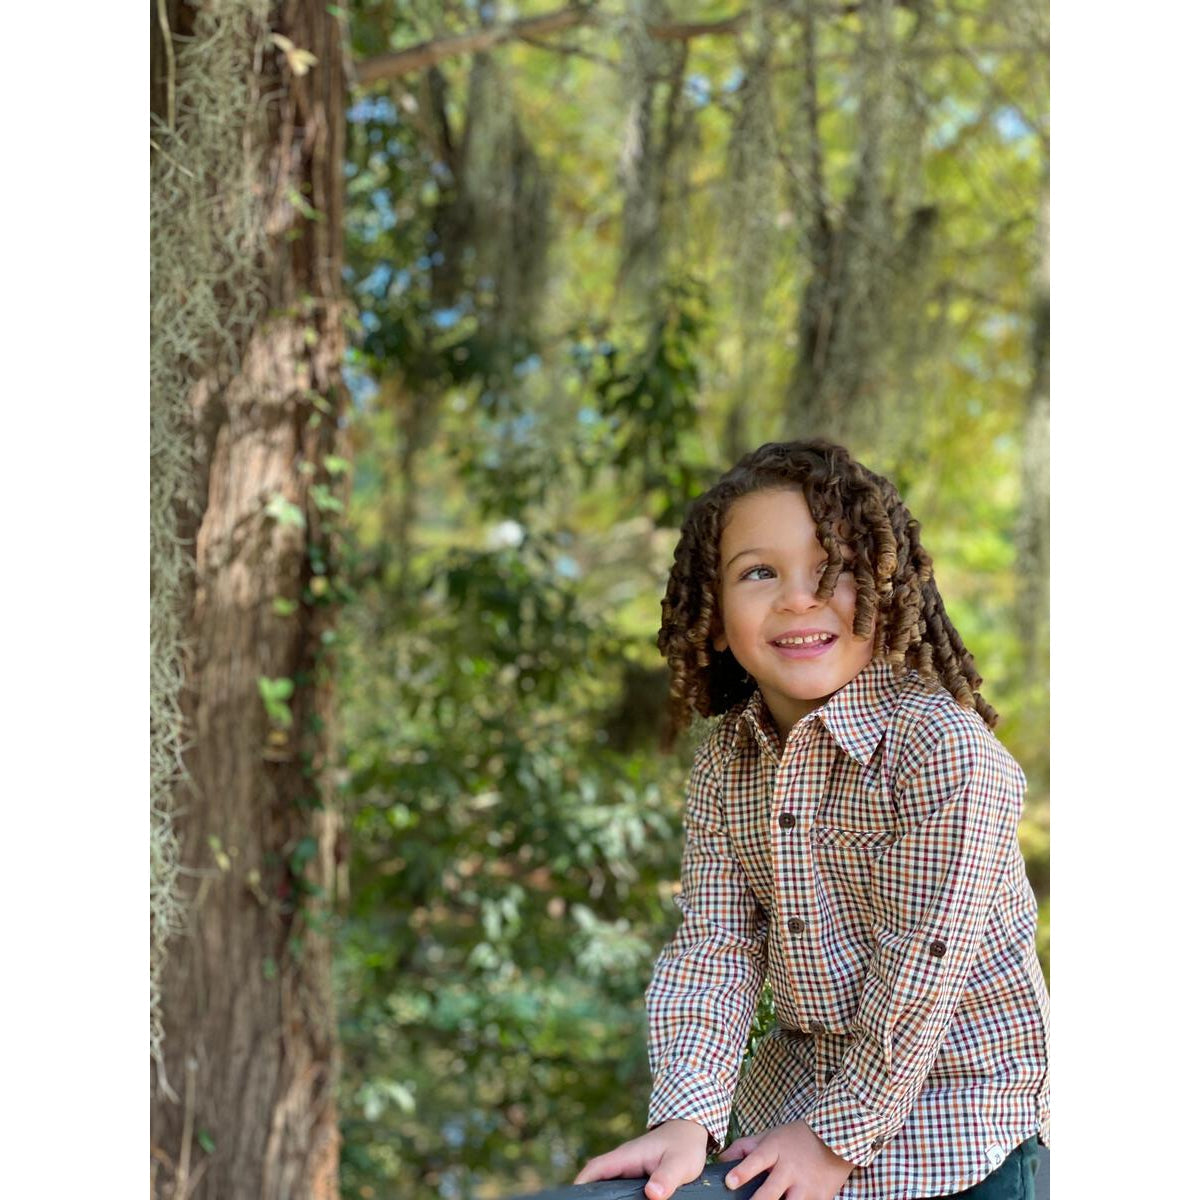 Me & Henry Atwood Woven Button Shirt - Navy/Gold Plaid-ME & HENRY-Little Giant Kidz